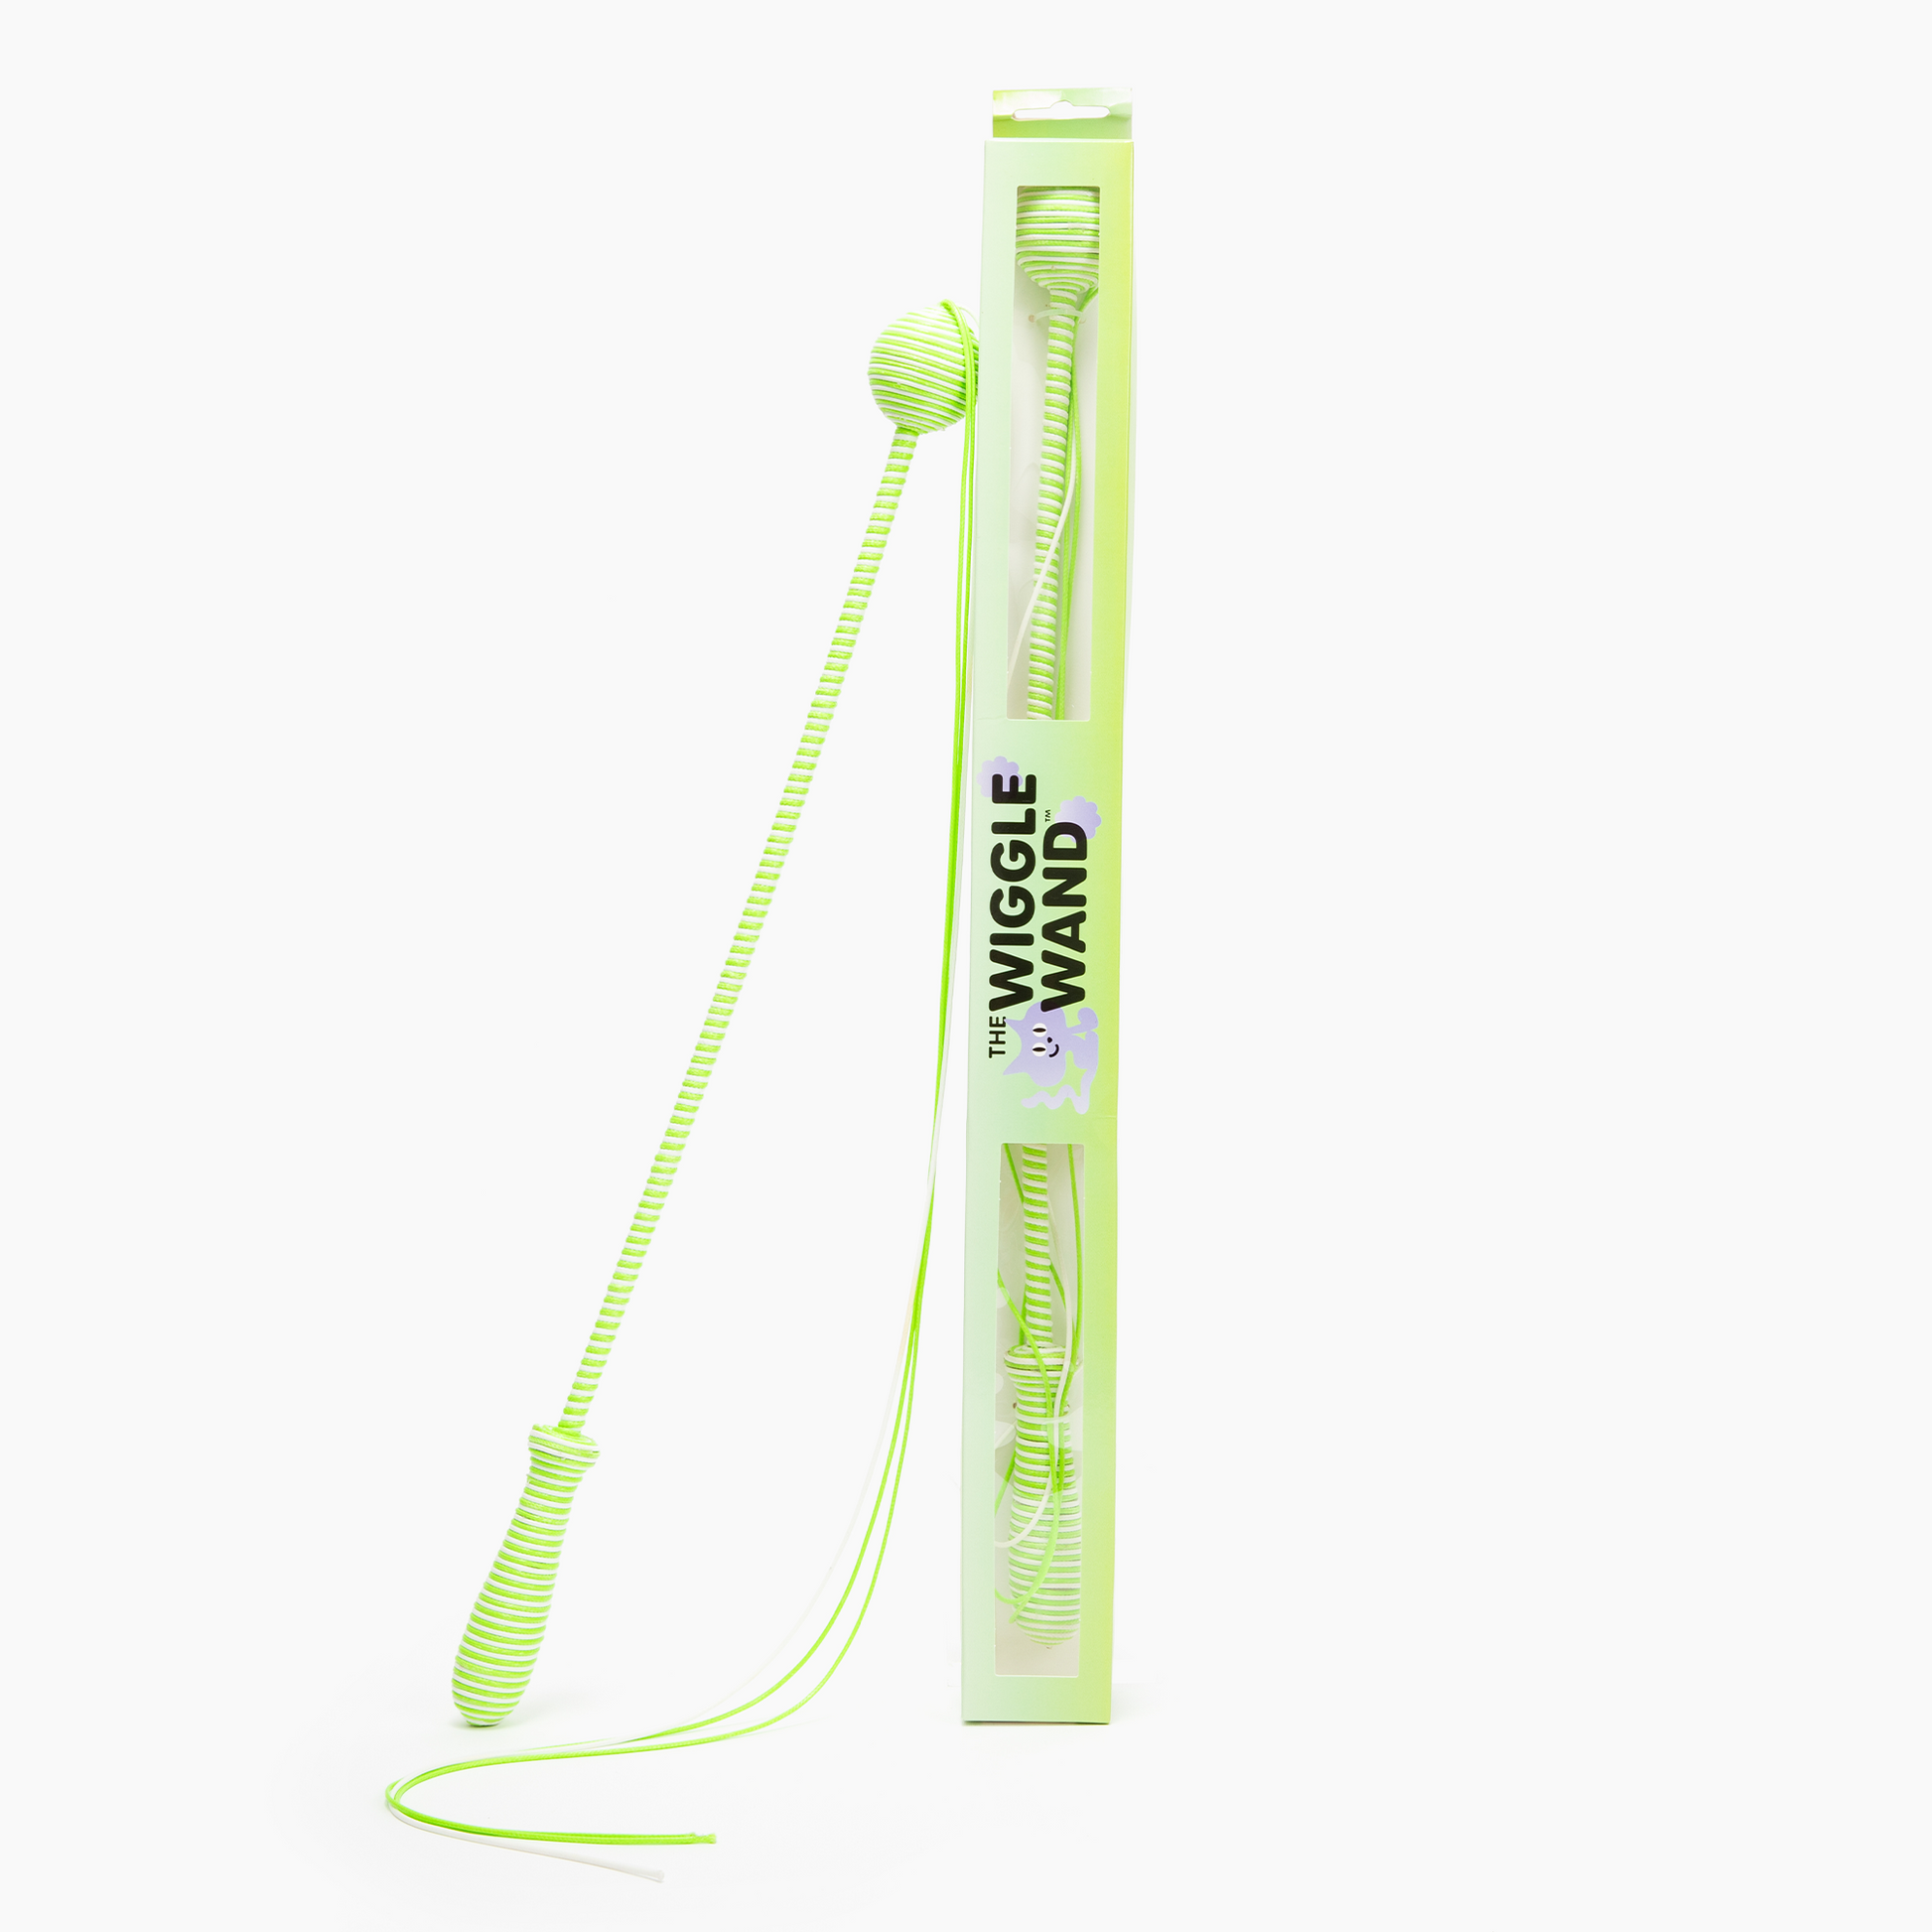 The Wiggle Wand Cat Toy - High-end Interactive String Teaser Wand with Rattle Top, Green